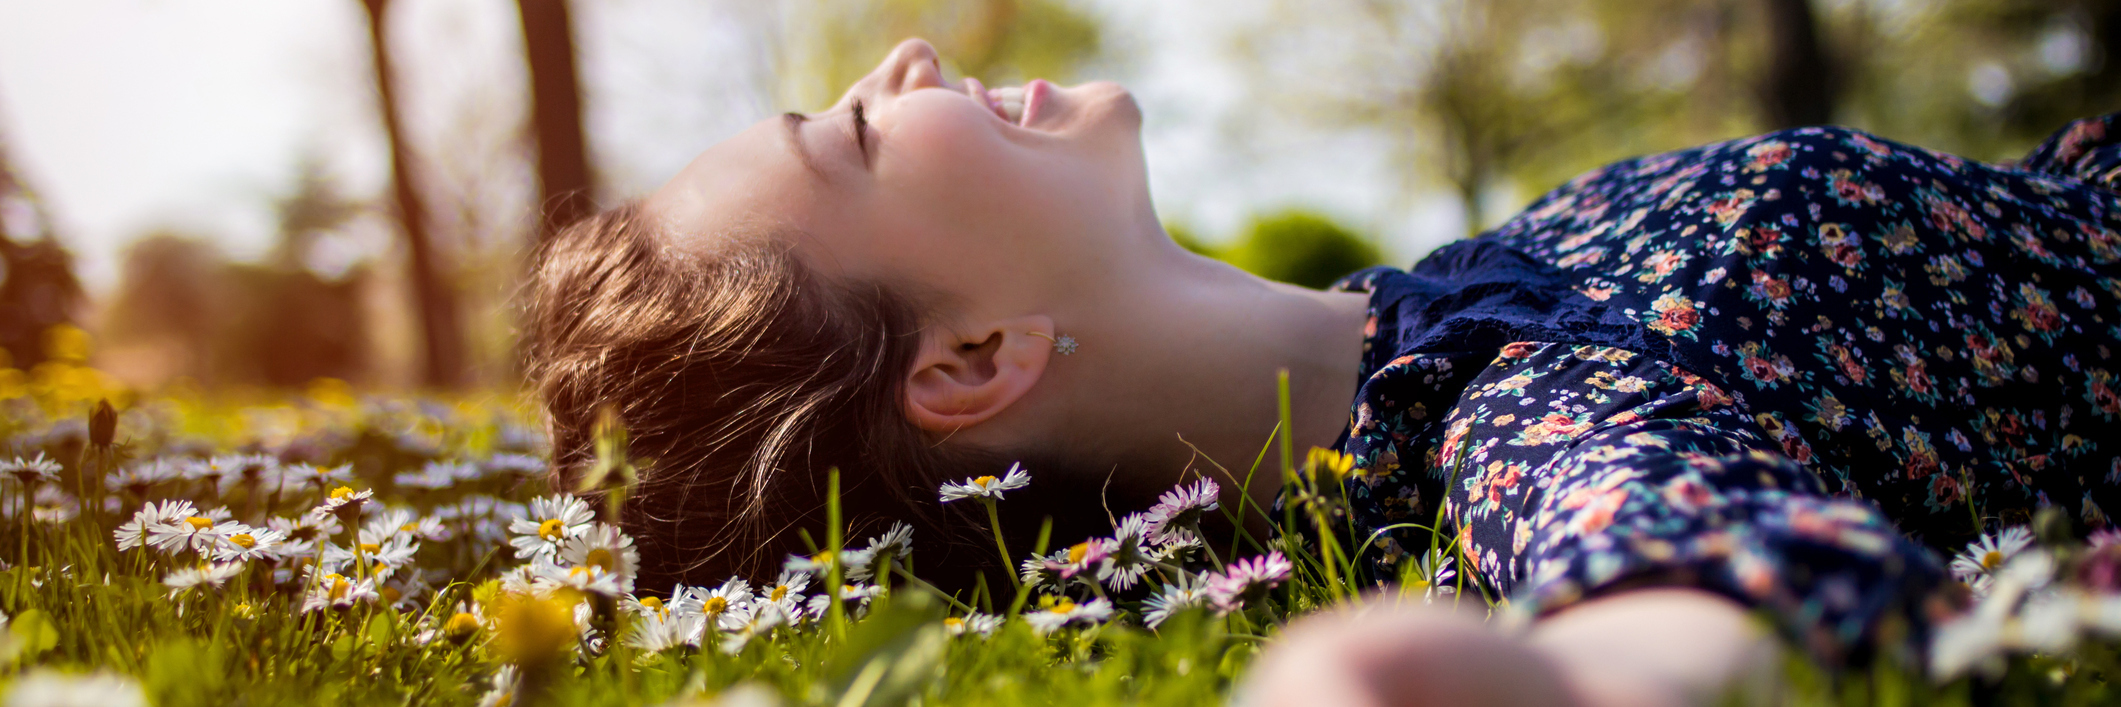 young girl lying on grass with daisies, smiling